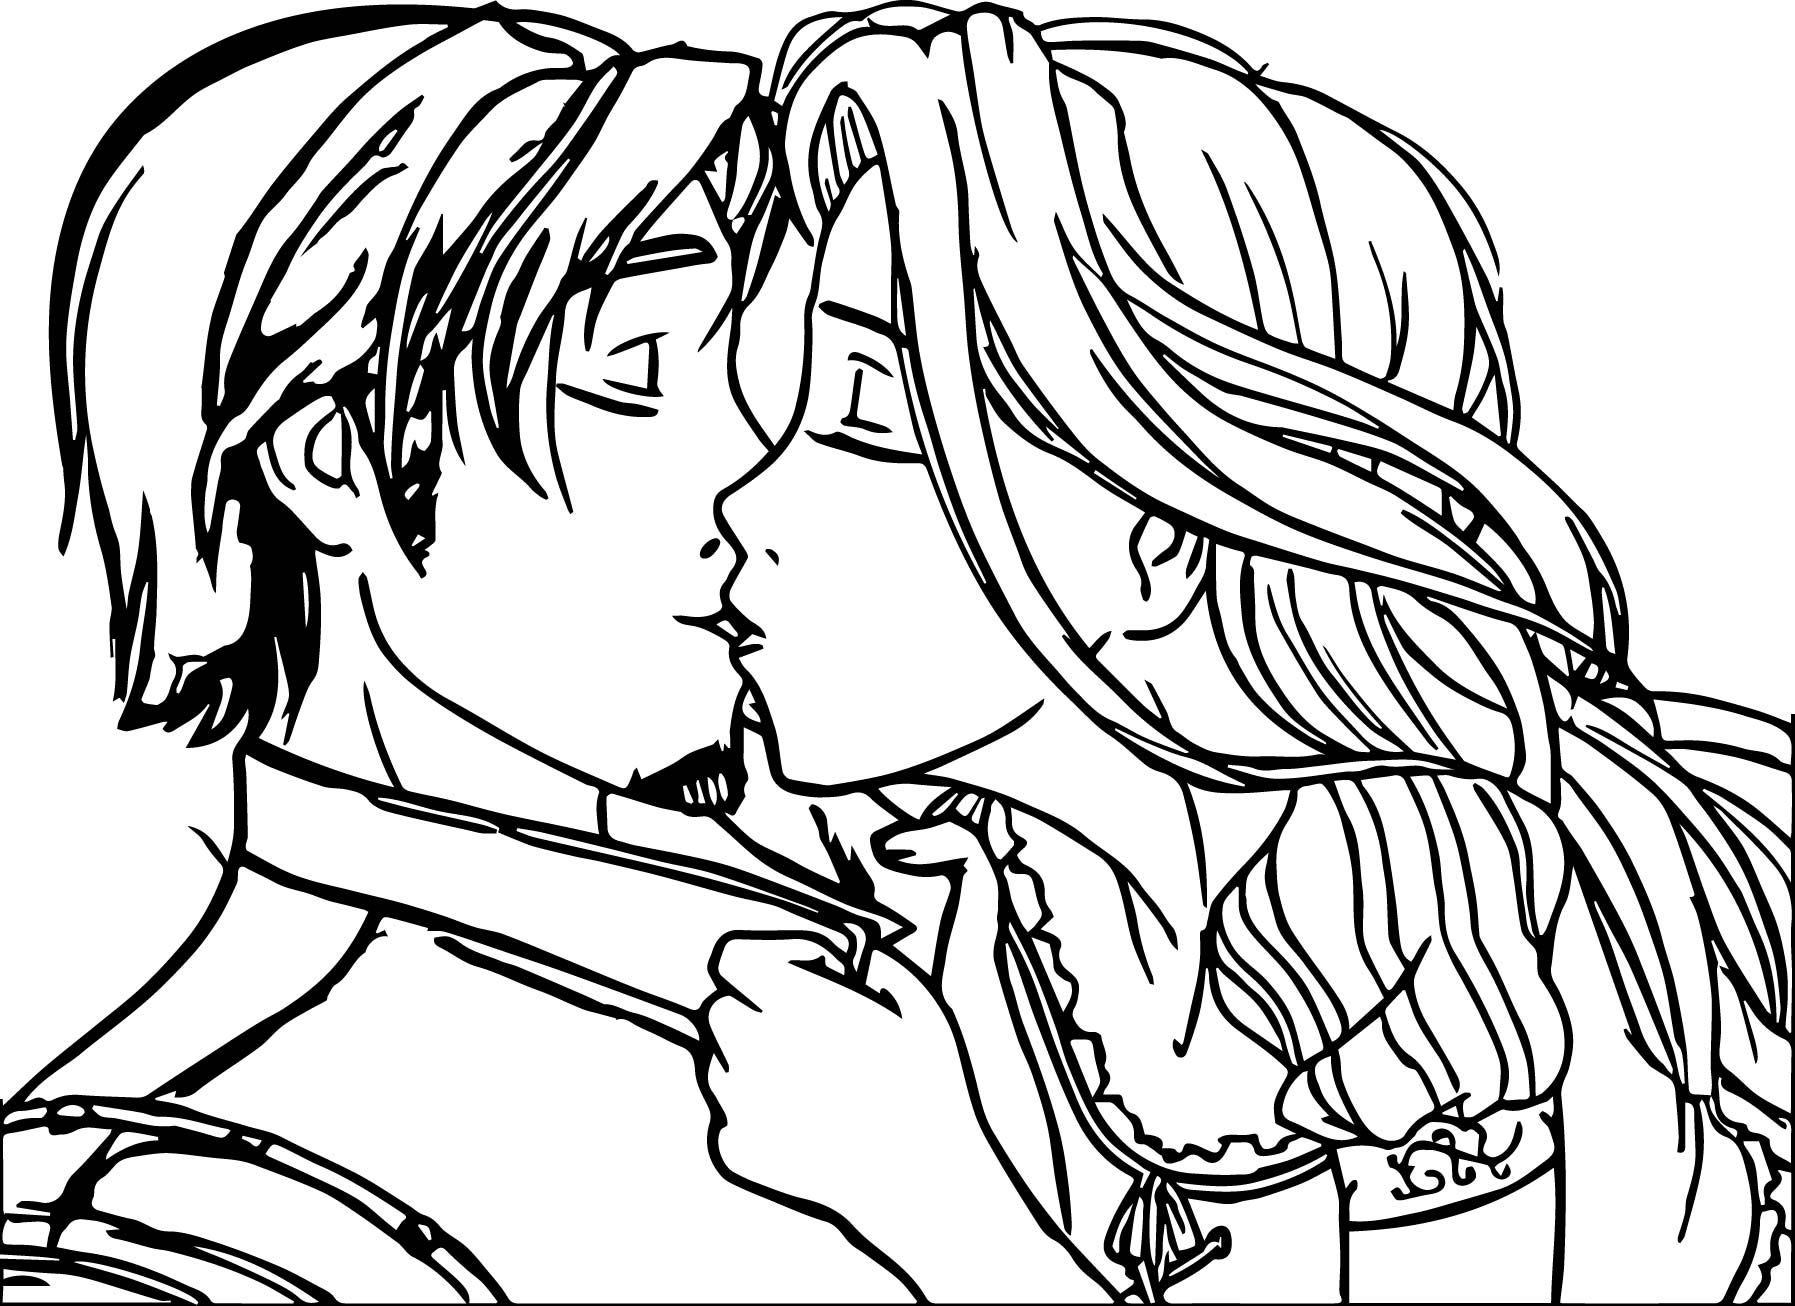 Coloring Pages : Awesome Rapunzel And Flynn Couple Kiss Coloring ...